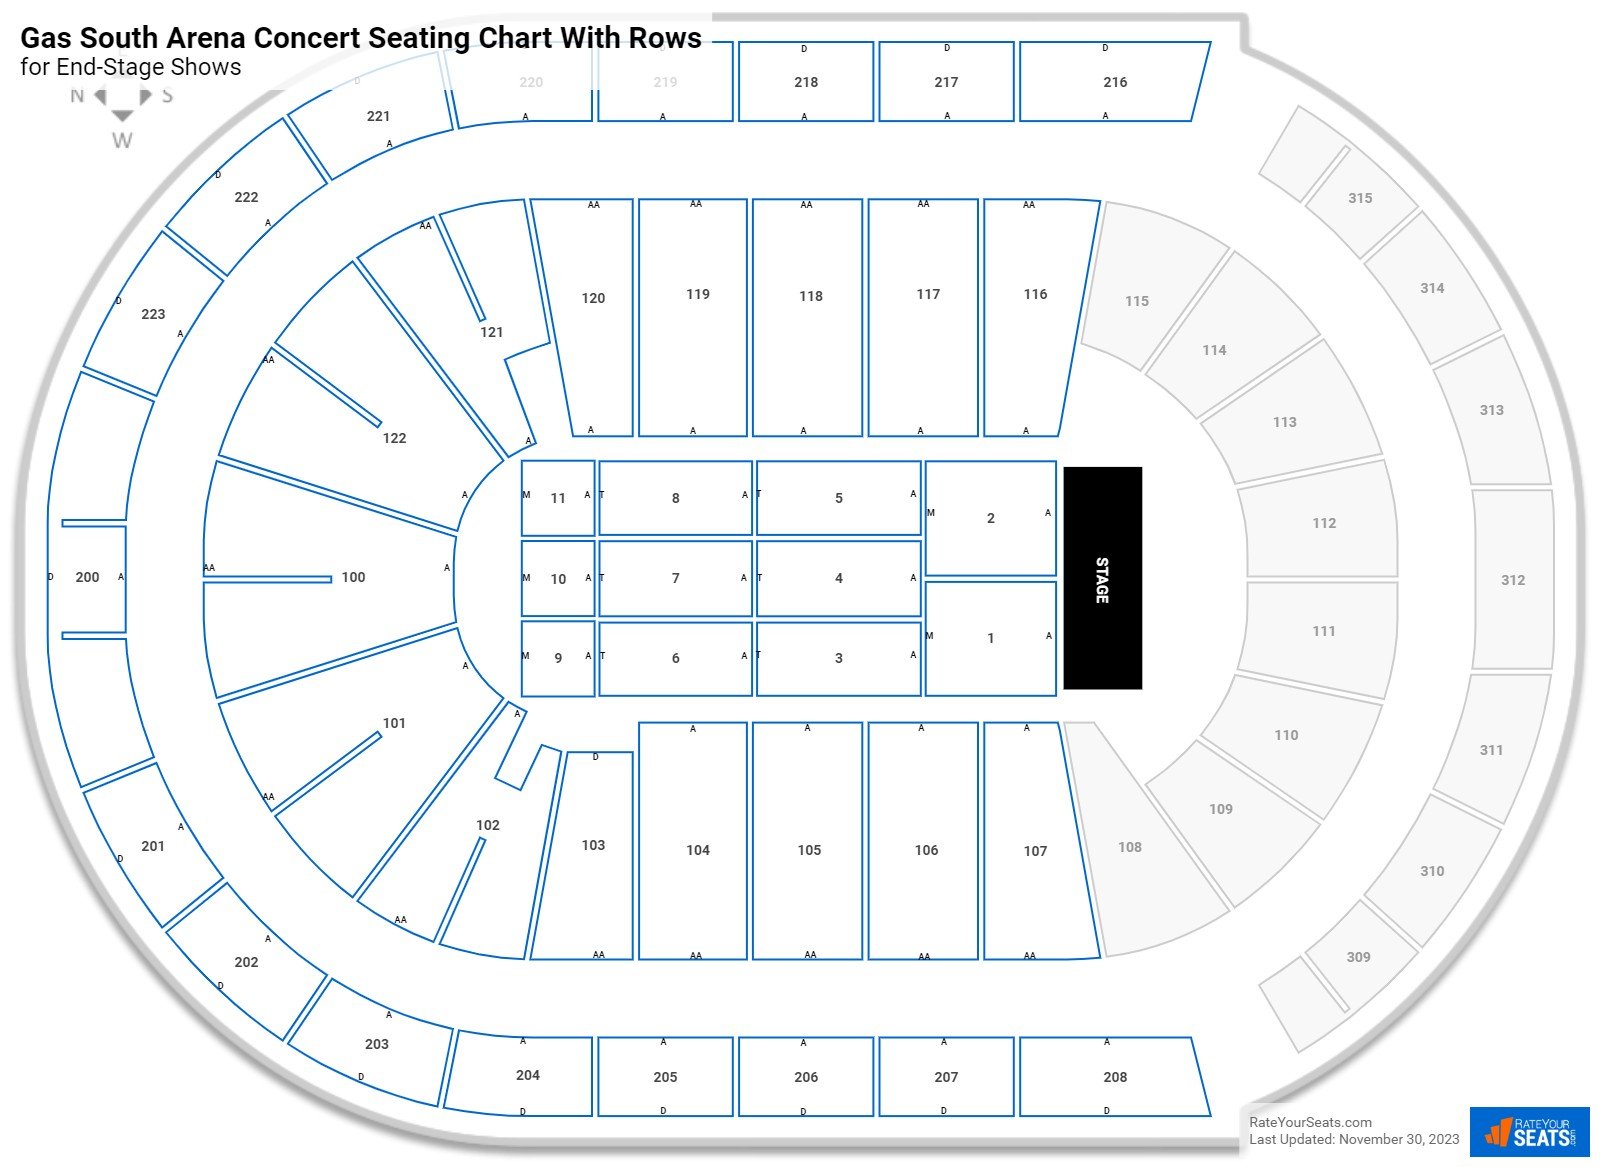 Infinite Energy Arena seating chart with row numbers